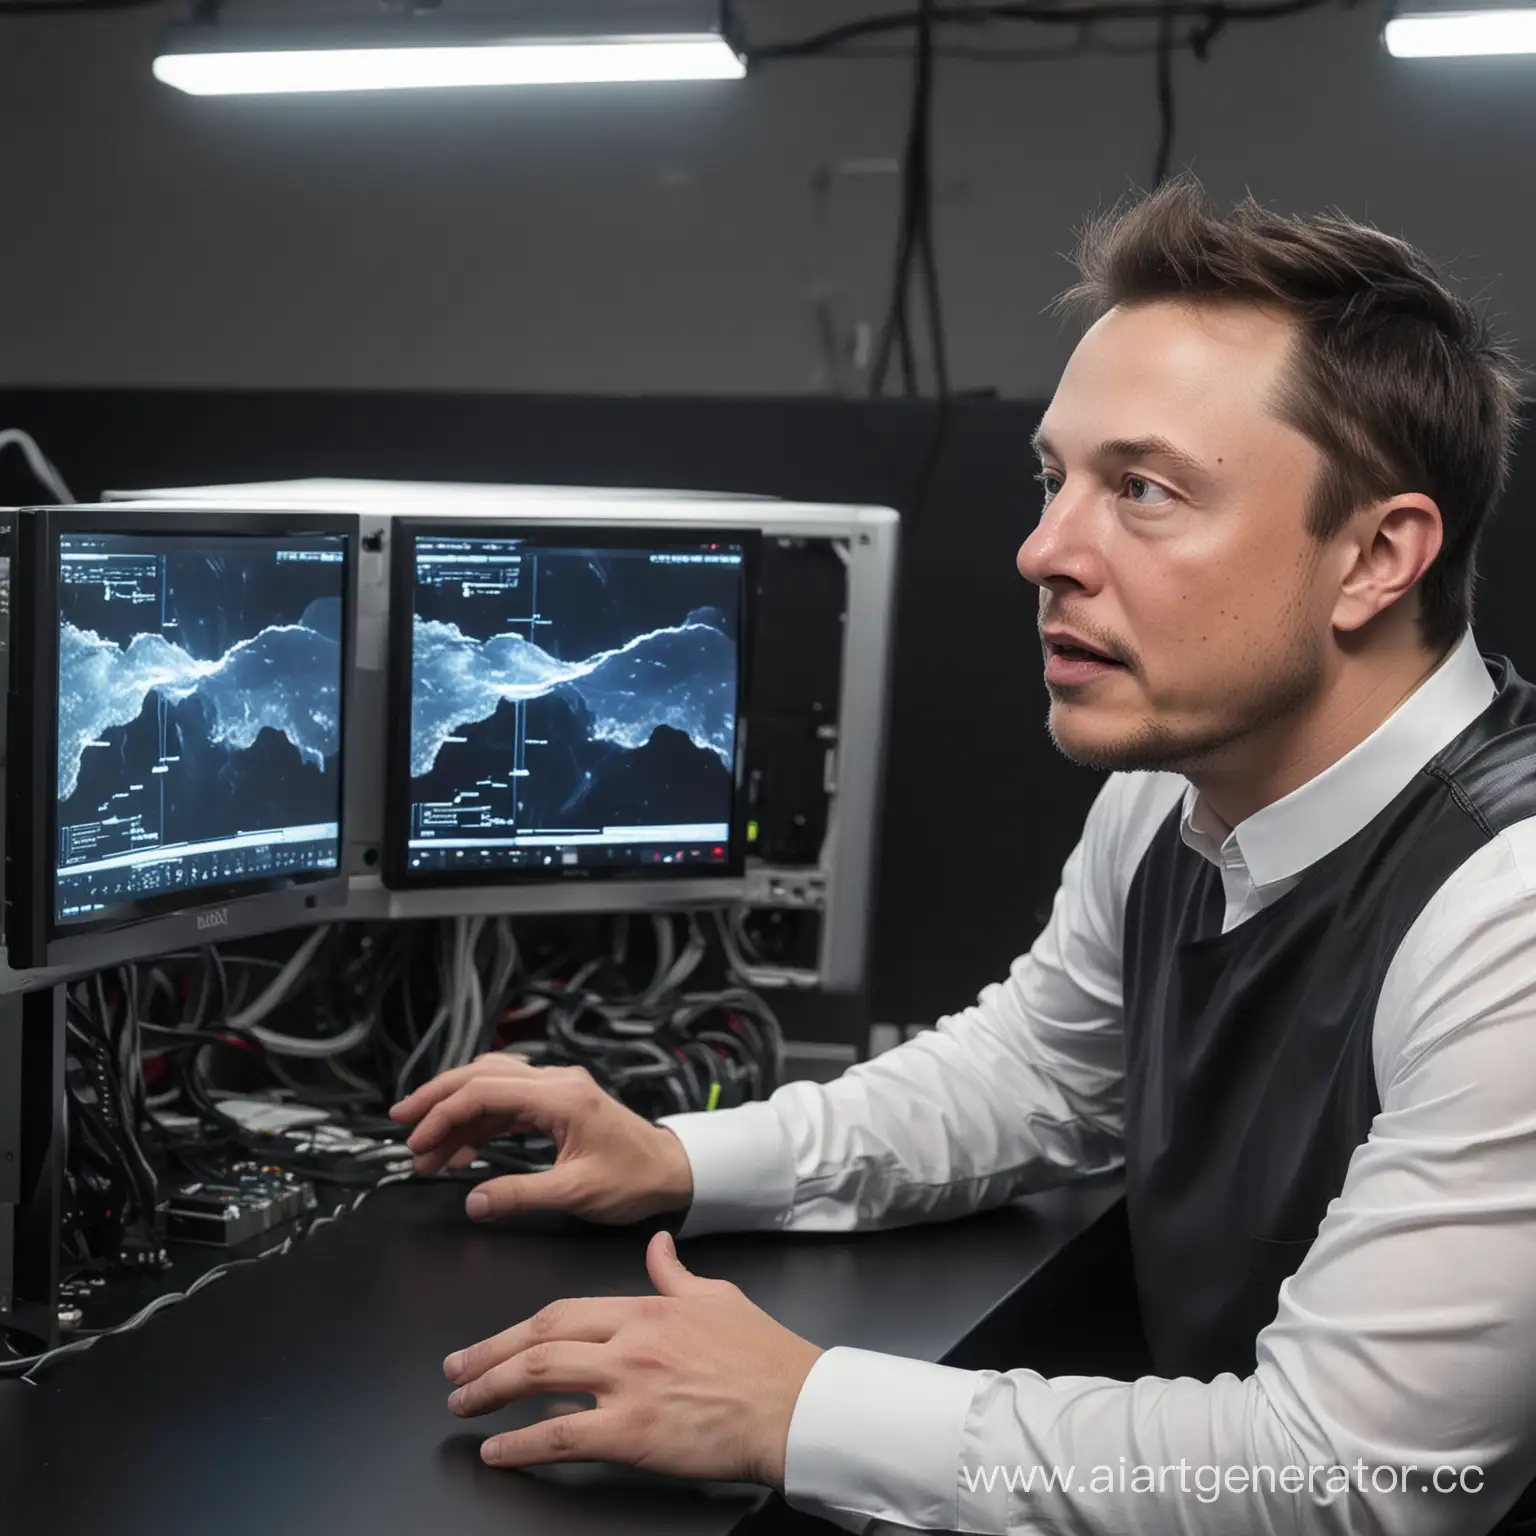 Elon-Musk-in-Awe-of-Advanced-Technology-Monitor